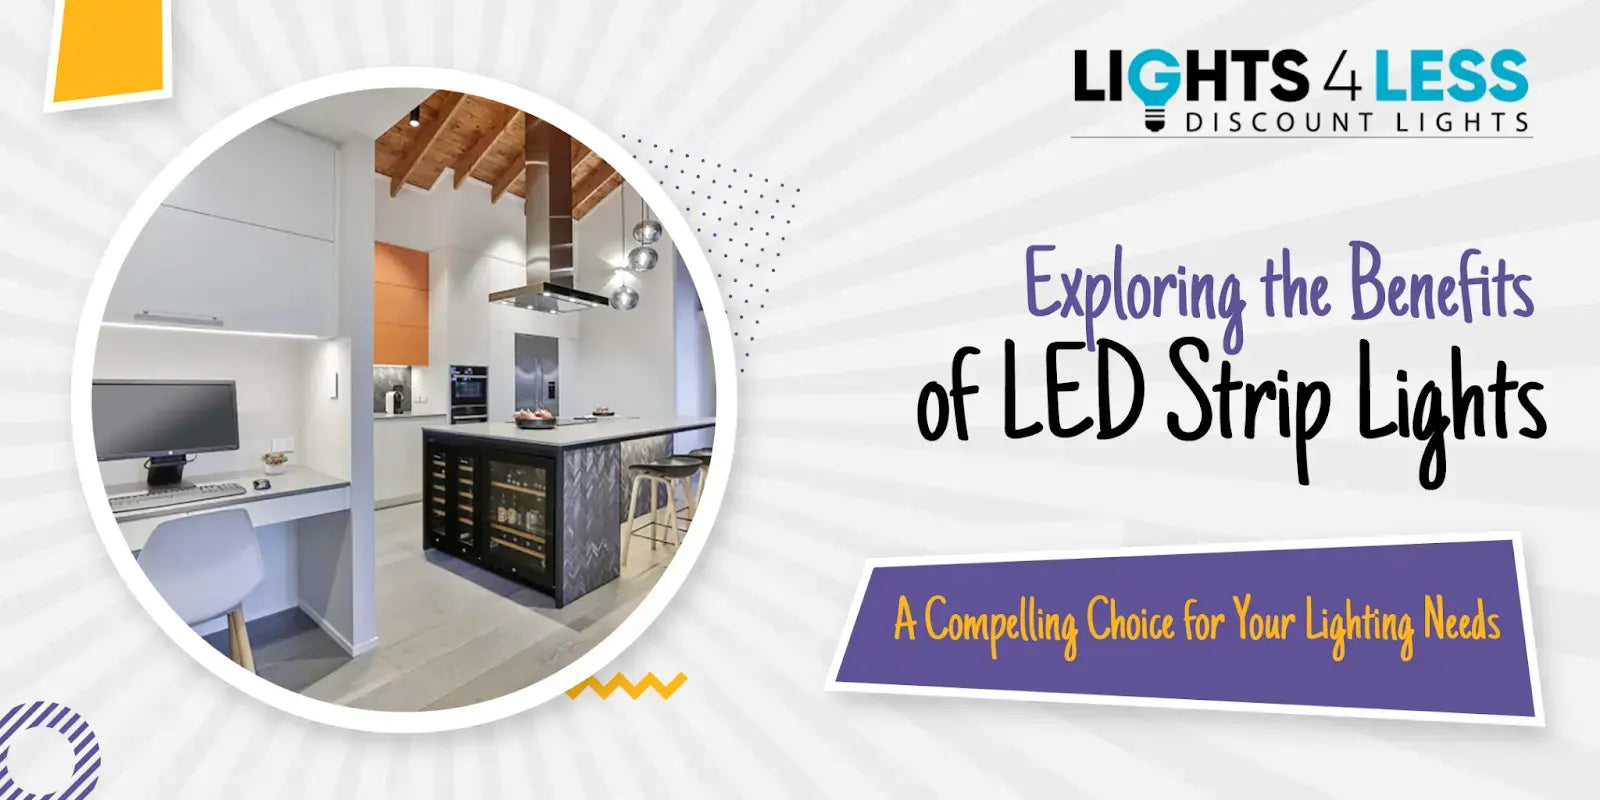 Why Should You Consider Using LED Strip Lights